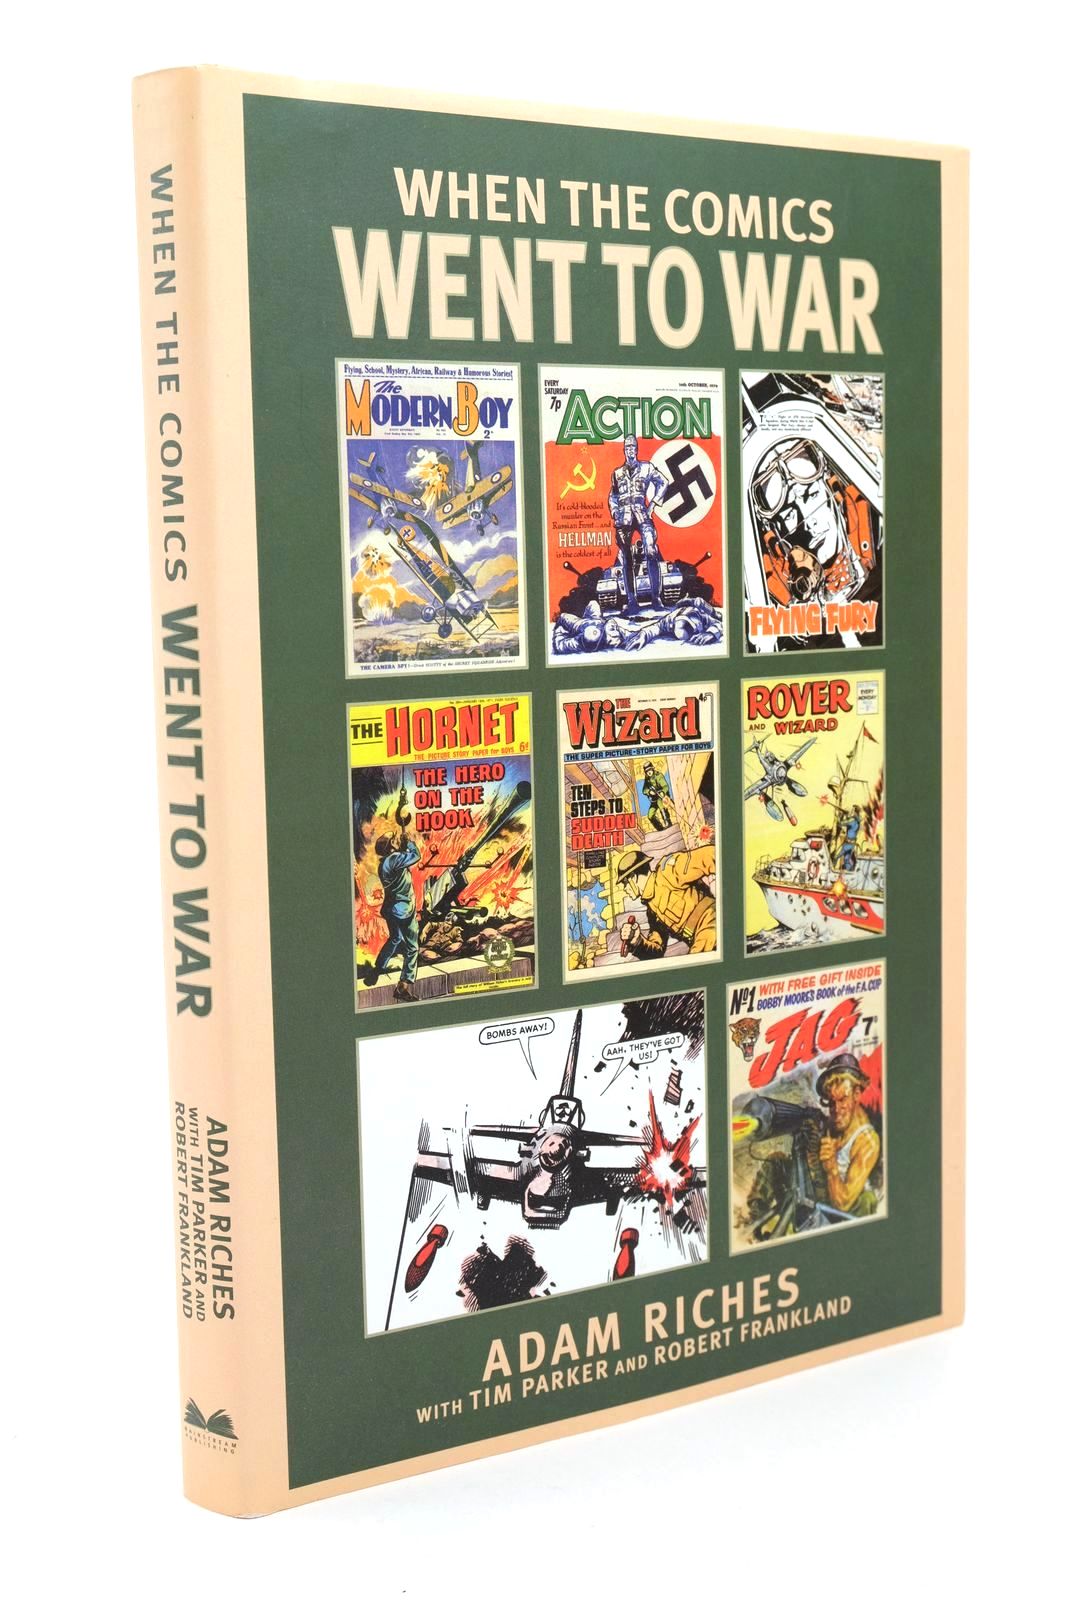 Photo of WHEN THE COMICS WENT TO WAR written by Riches, Adam published by Mainstream Publishing Company (Edinburgh) Ltd. (STOCK CODE: 1323017)  for sale by Stella & Rose's Books